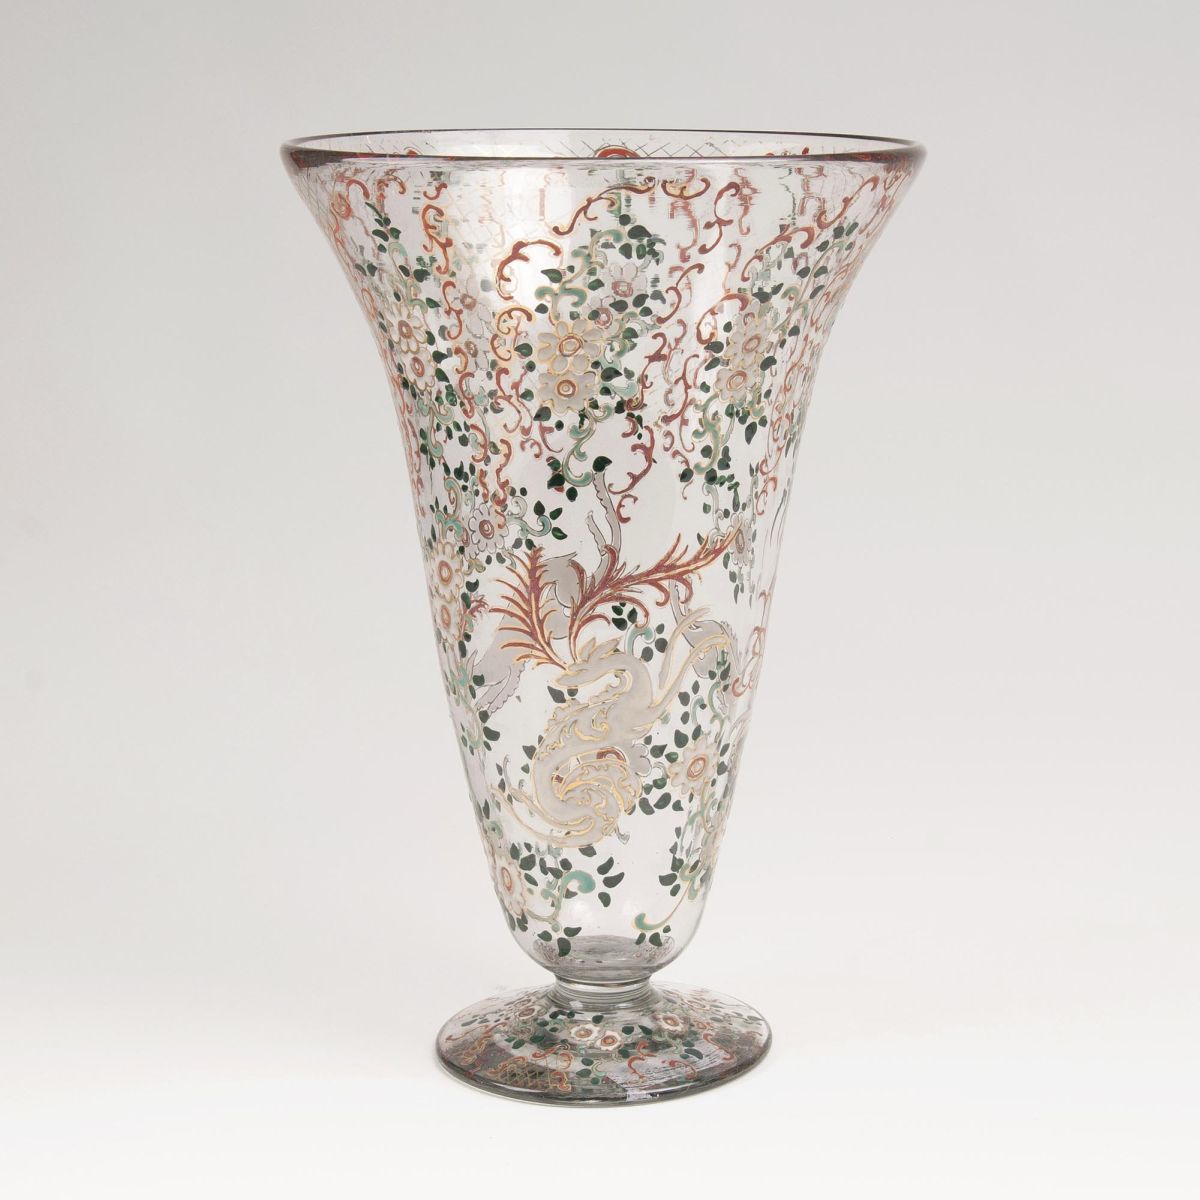 A Large Pocal Vase with Arabesques